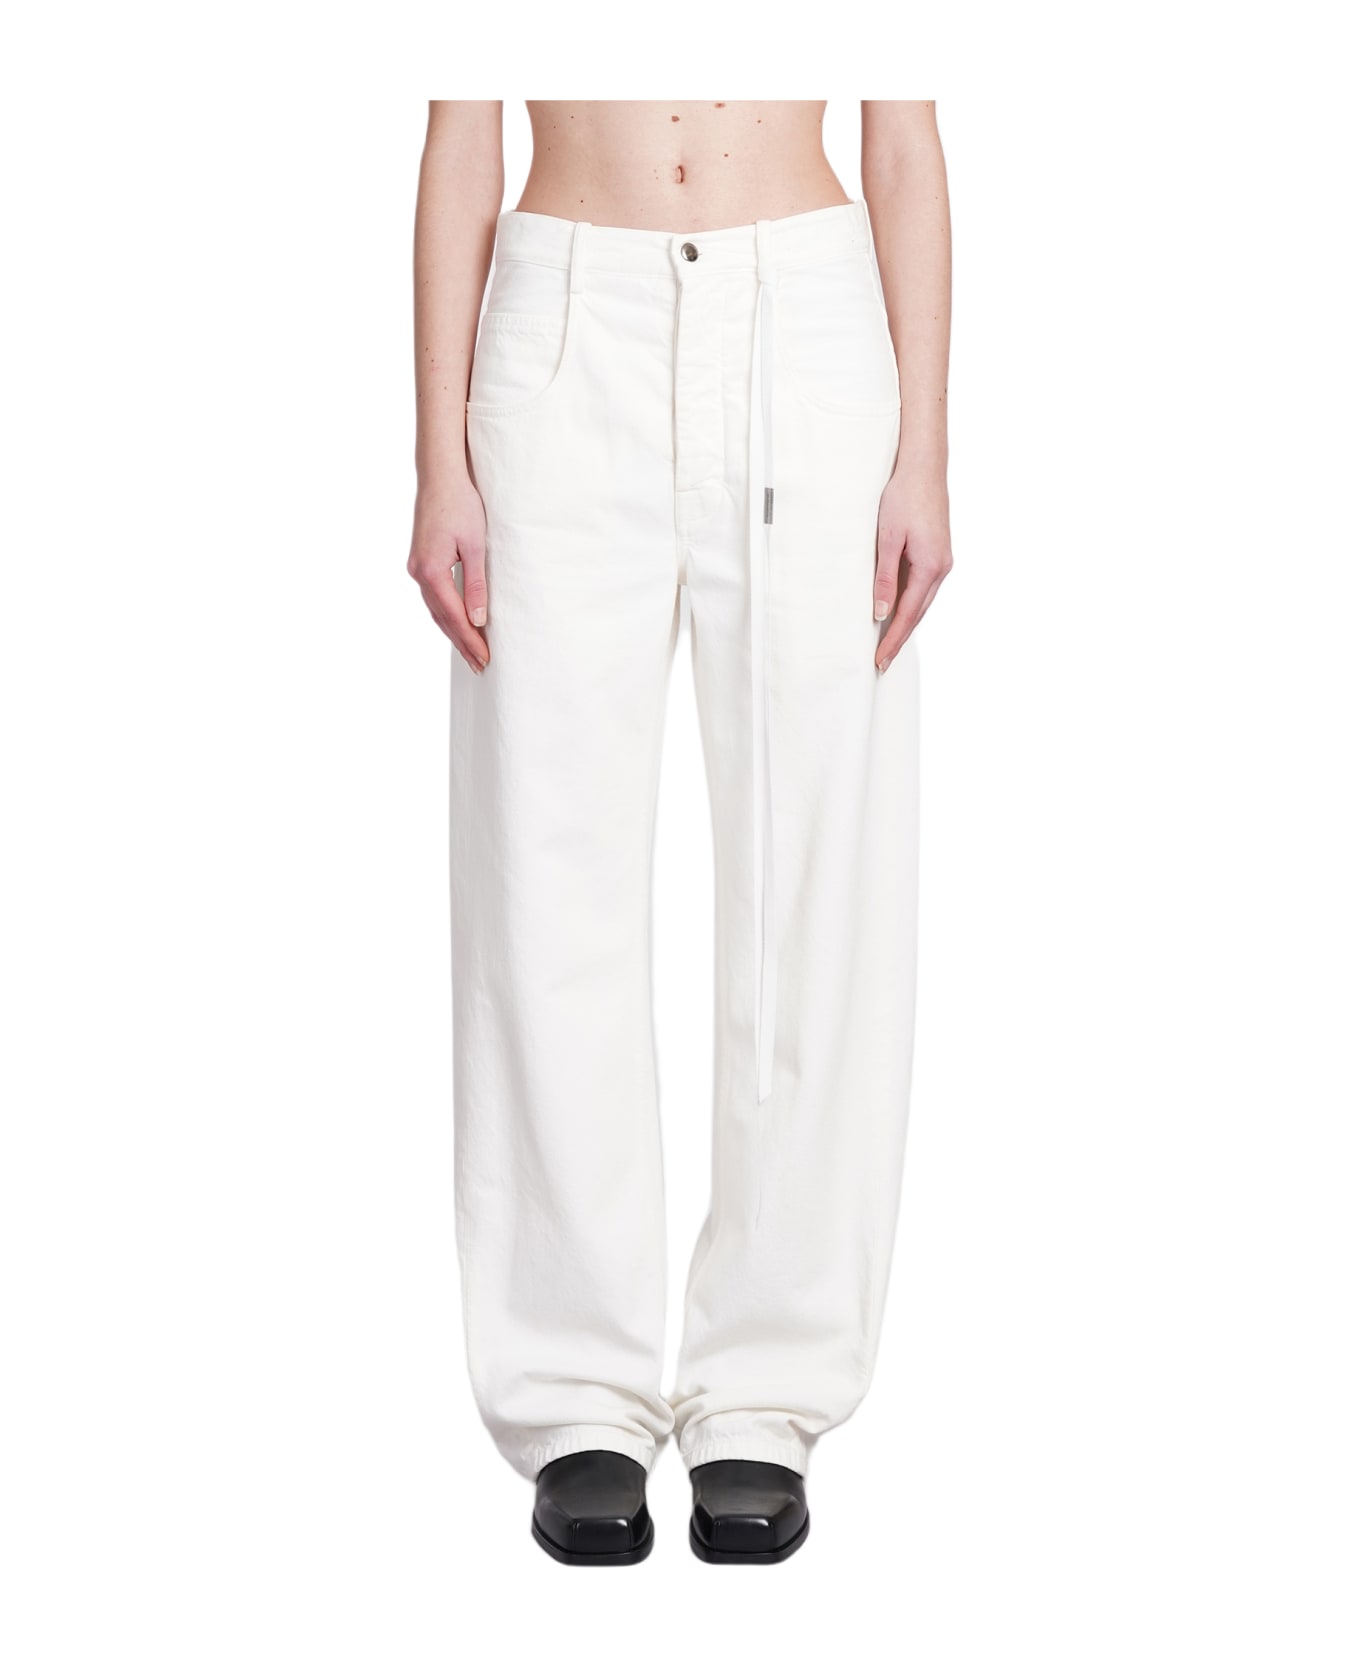 Ann Demeulemeester Jeans In White Cotton - white